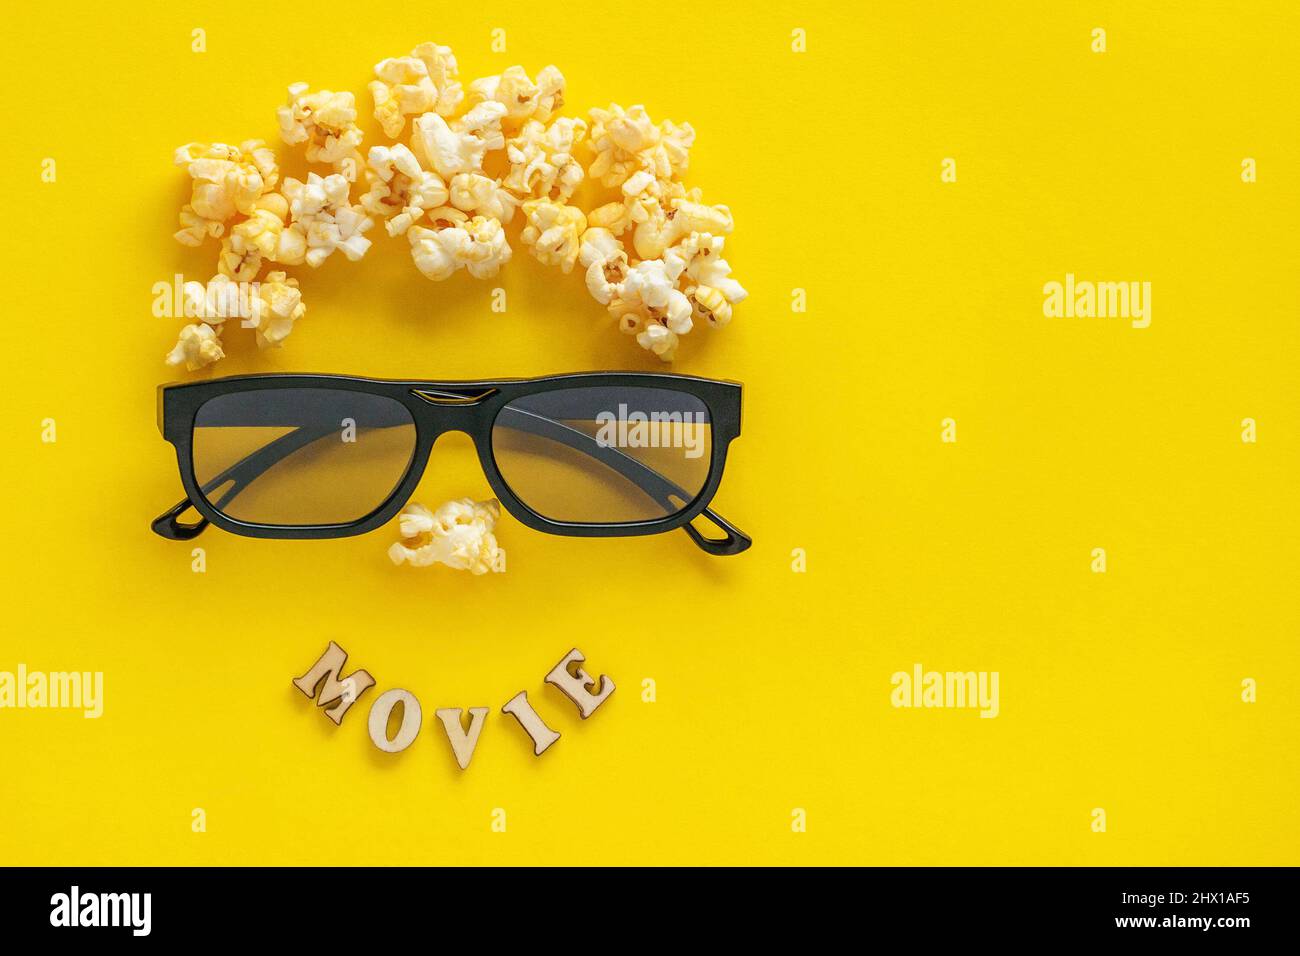 Abstract image of viewer, 3D glasses and popcorn, text MOVIE on yellow background. Still life, top view, flat lay. Concept cinema and entertainment Stock Photo